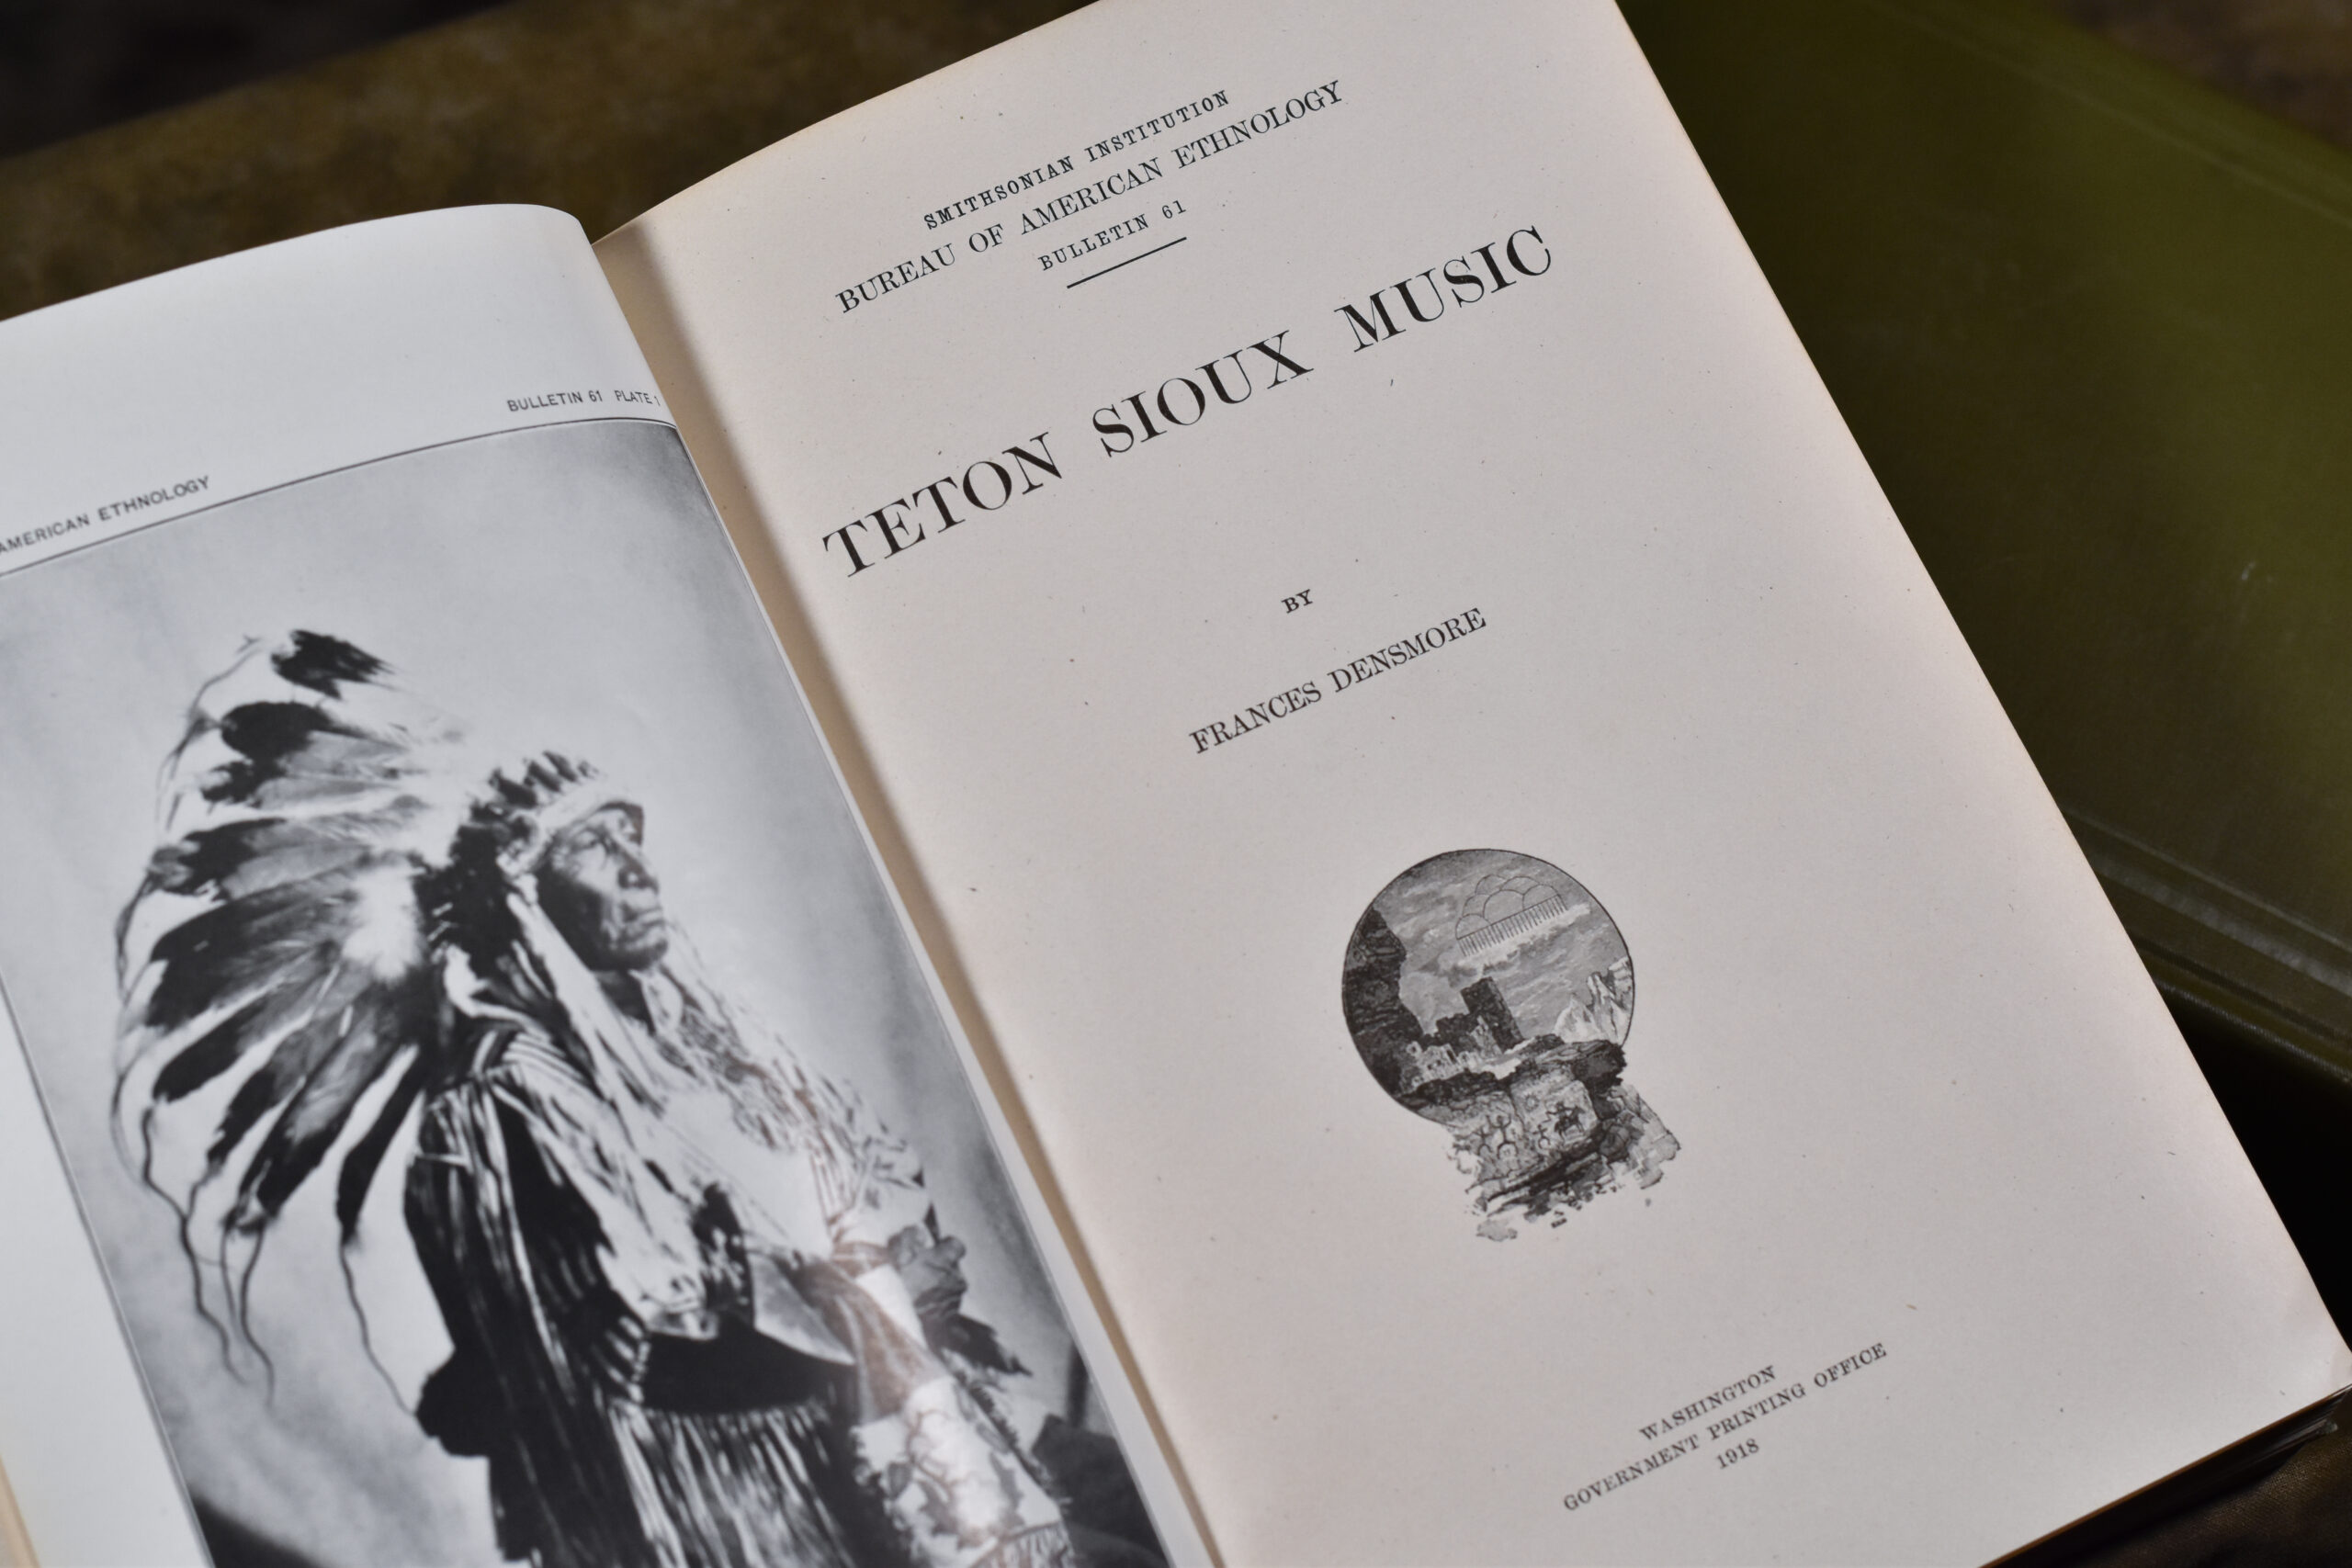 An open book with apage showing the title, Teton Sioux Music by Frances Densmore, and a facing page containing a photo of a Native American person in a traditional headgear.